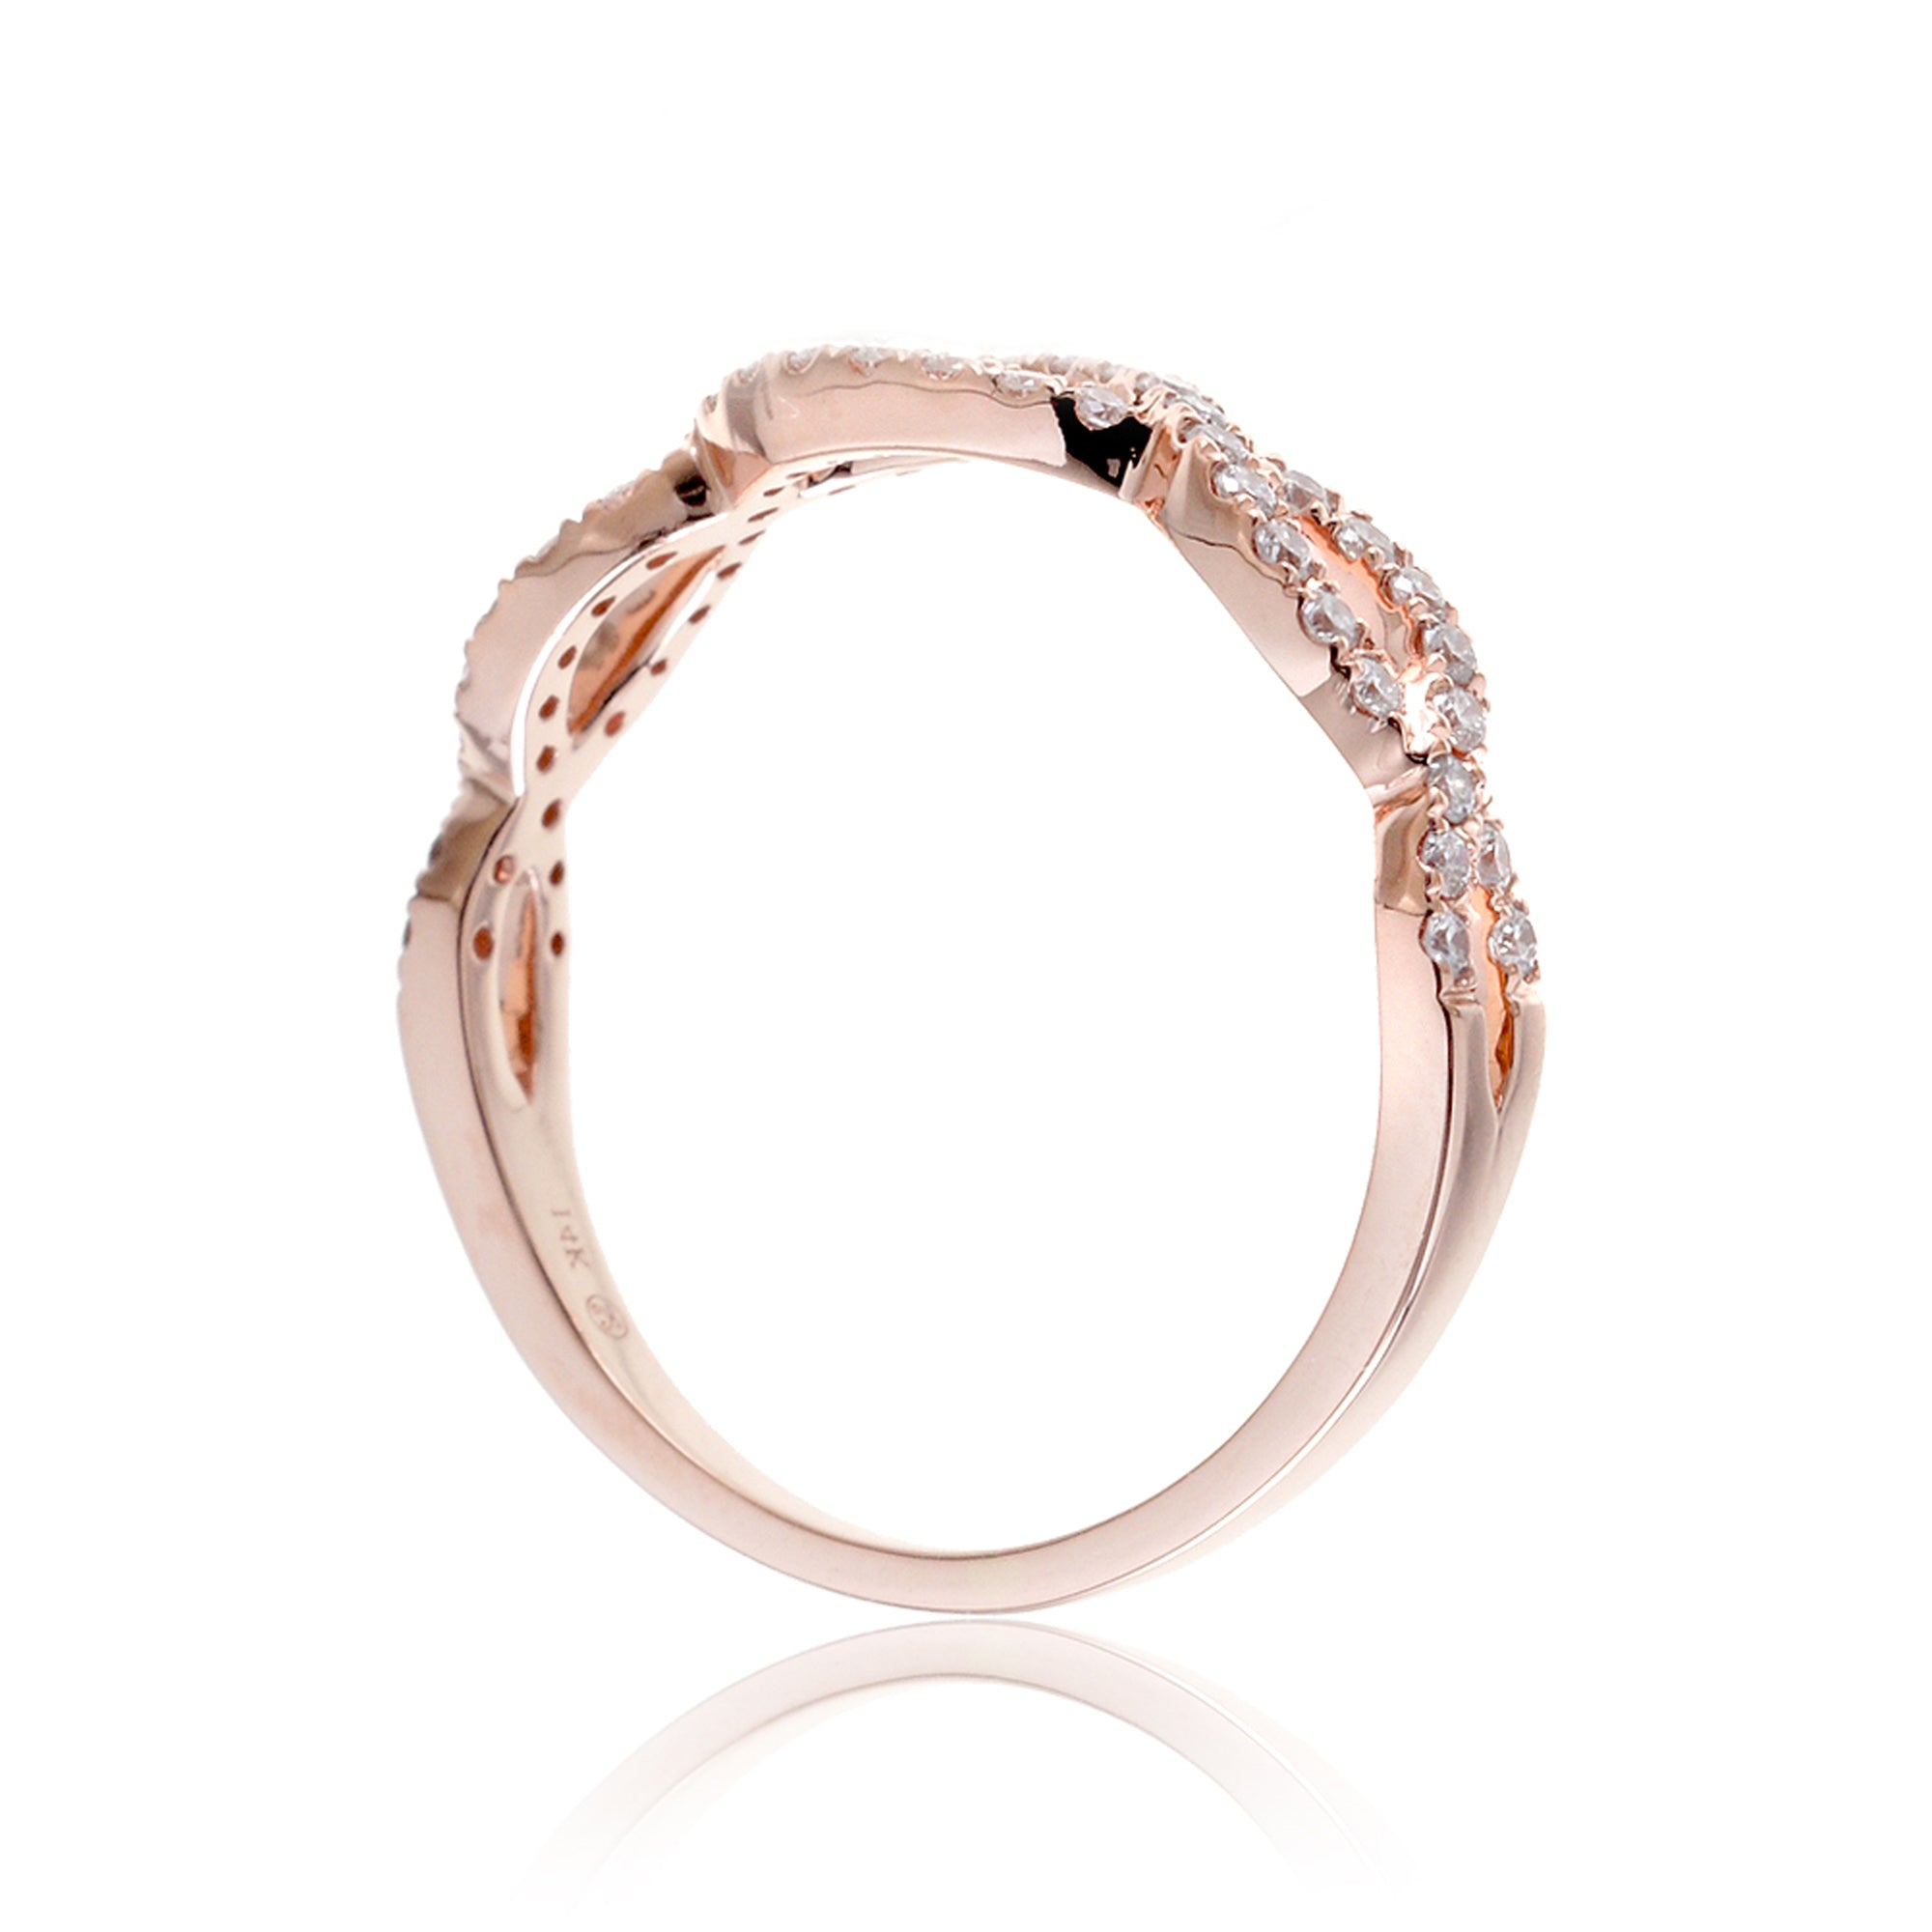 Twisted infinity diamond wedding band the Rosy rose gold